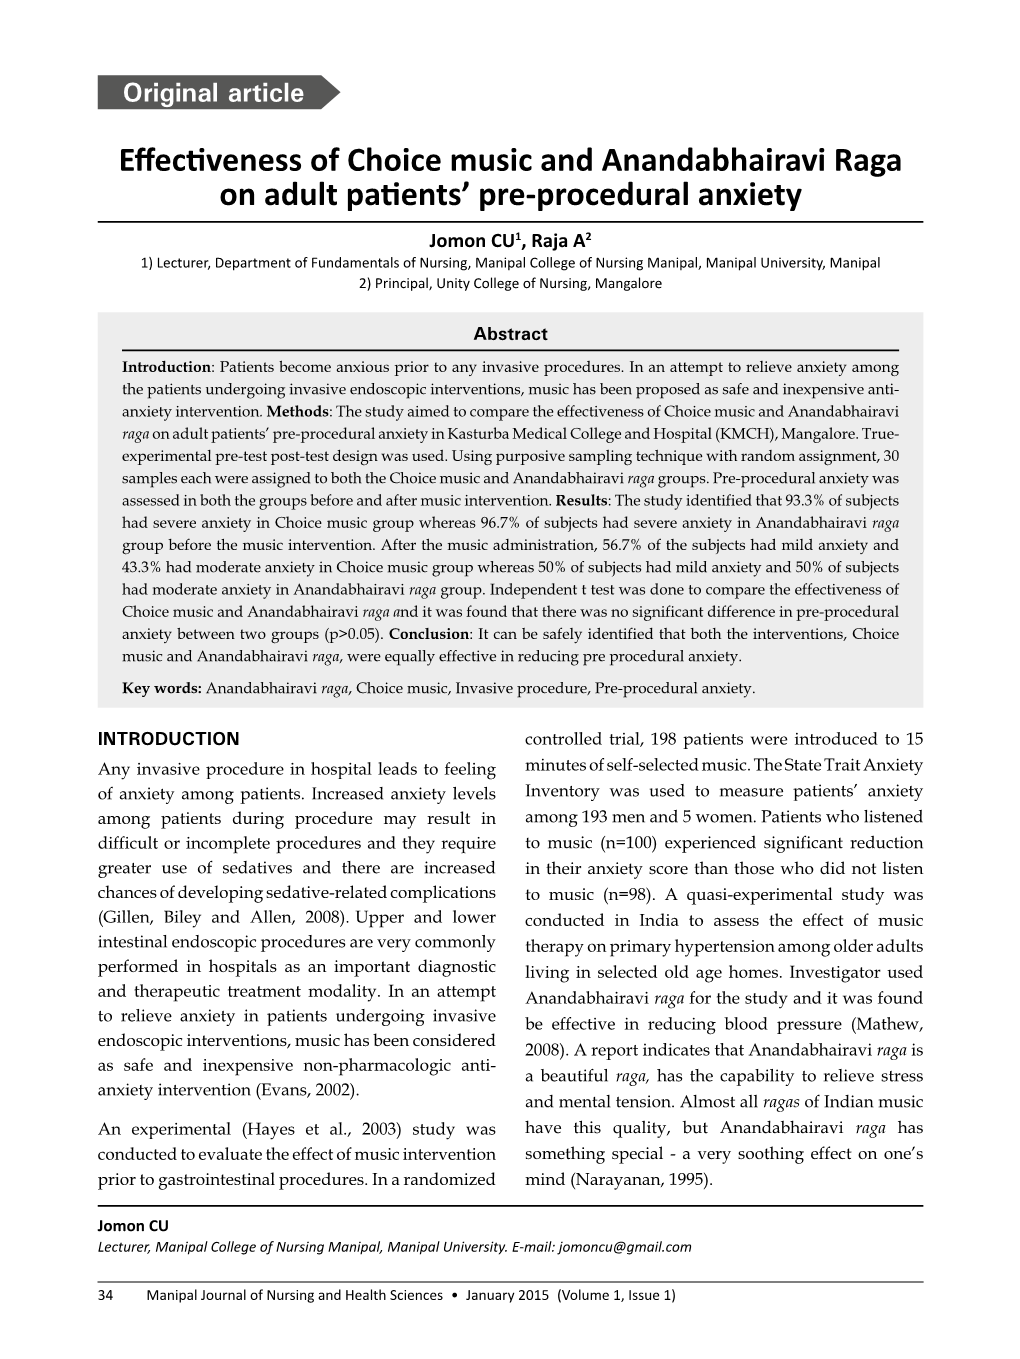 Effectiveness of Choice Music and Anandabhairavi Raga on Adult Patients' Pre-Procedural Anxiety